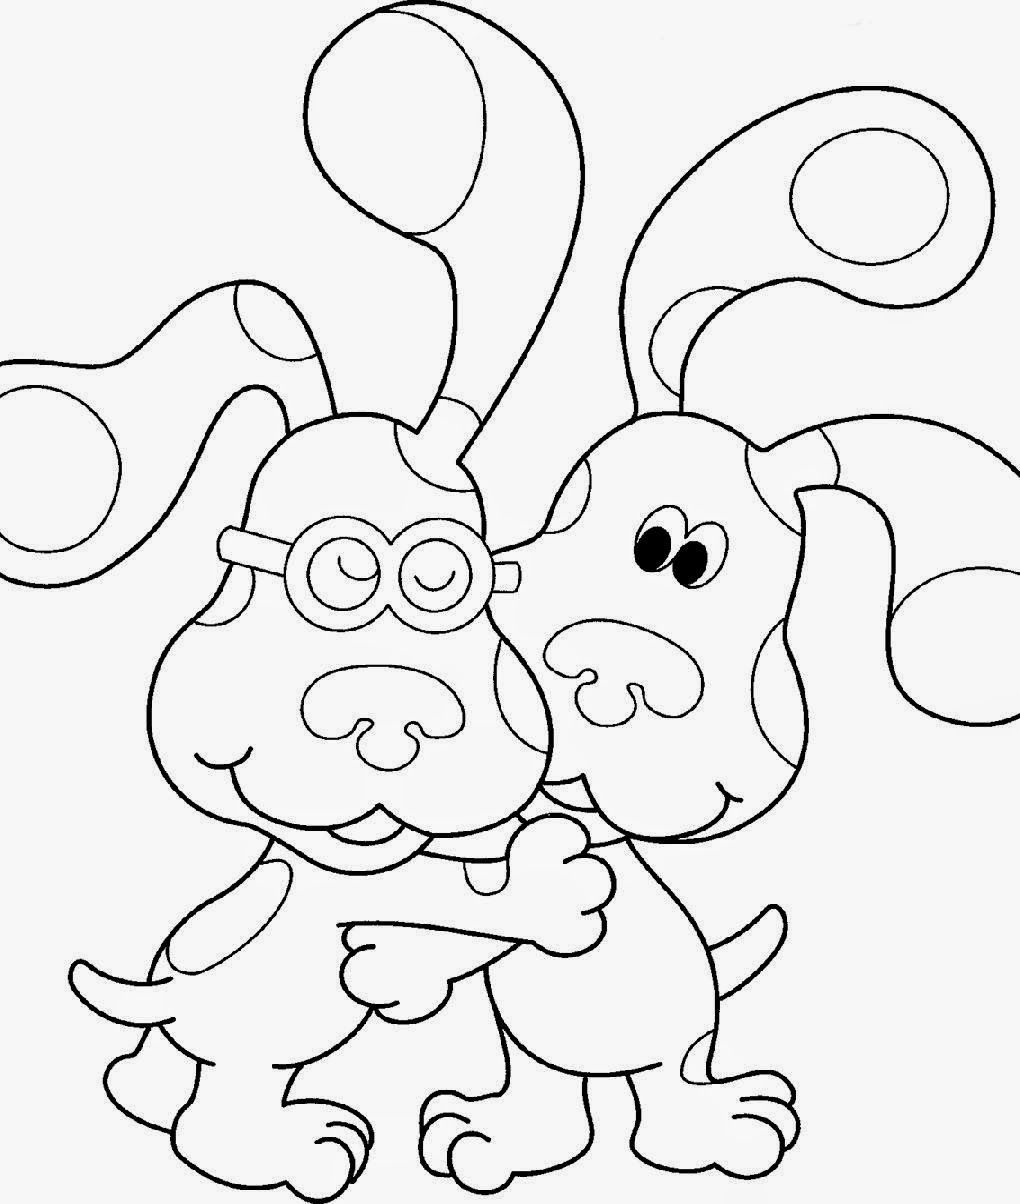 Blues Clues Coloring Pages | Free Coloring Pages